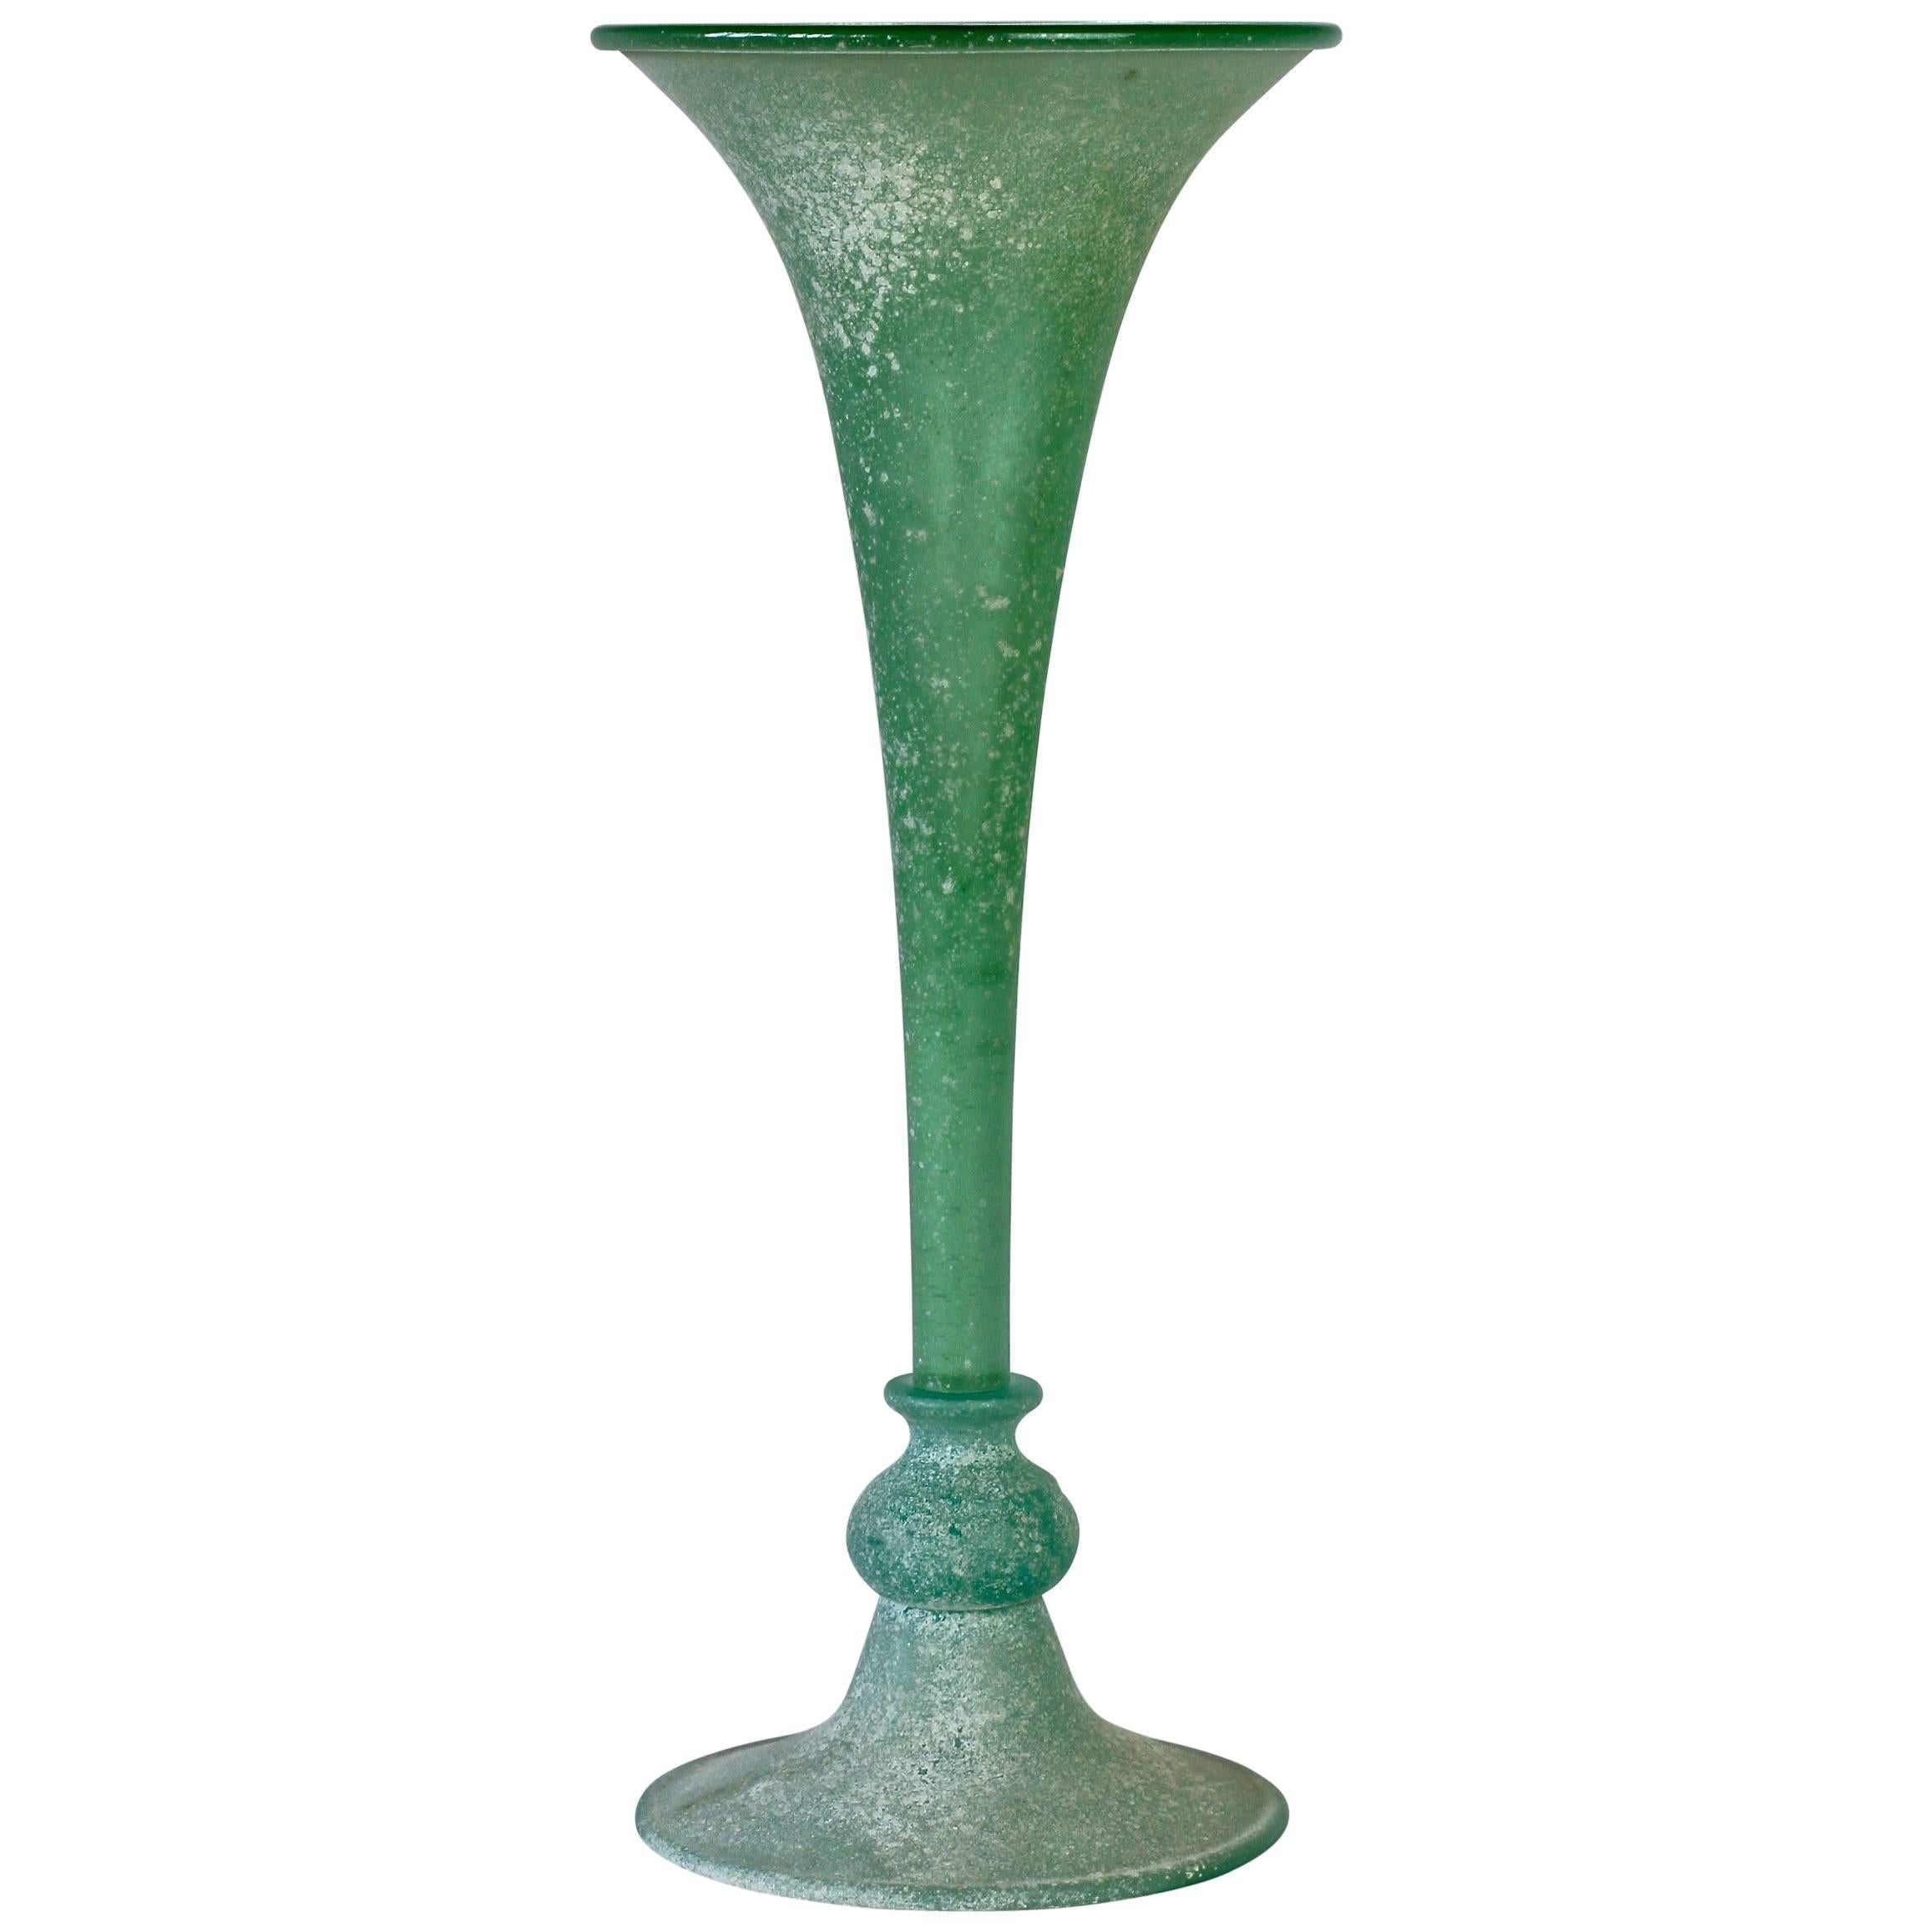 Tall Green 'A Scavo' Murano Glass Fluted Vase Attributed to Seguso Vetri d'Arte For Sale